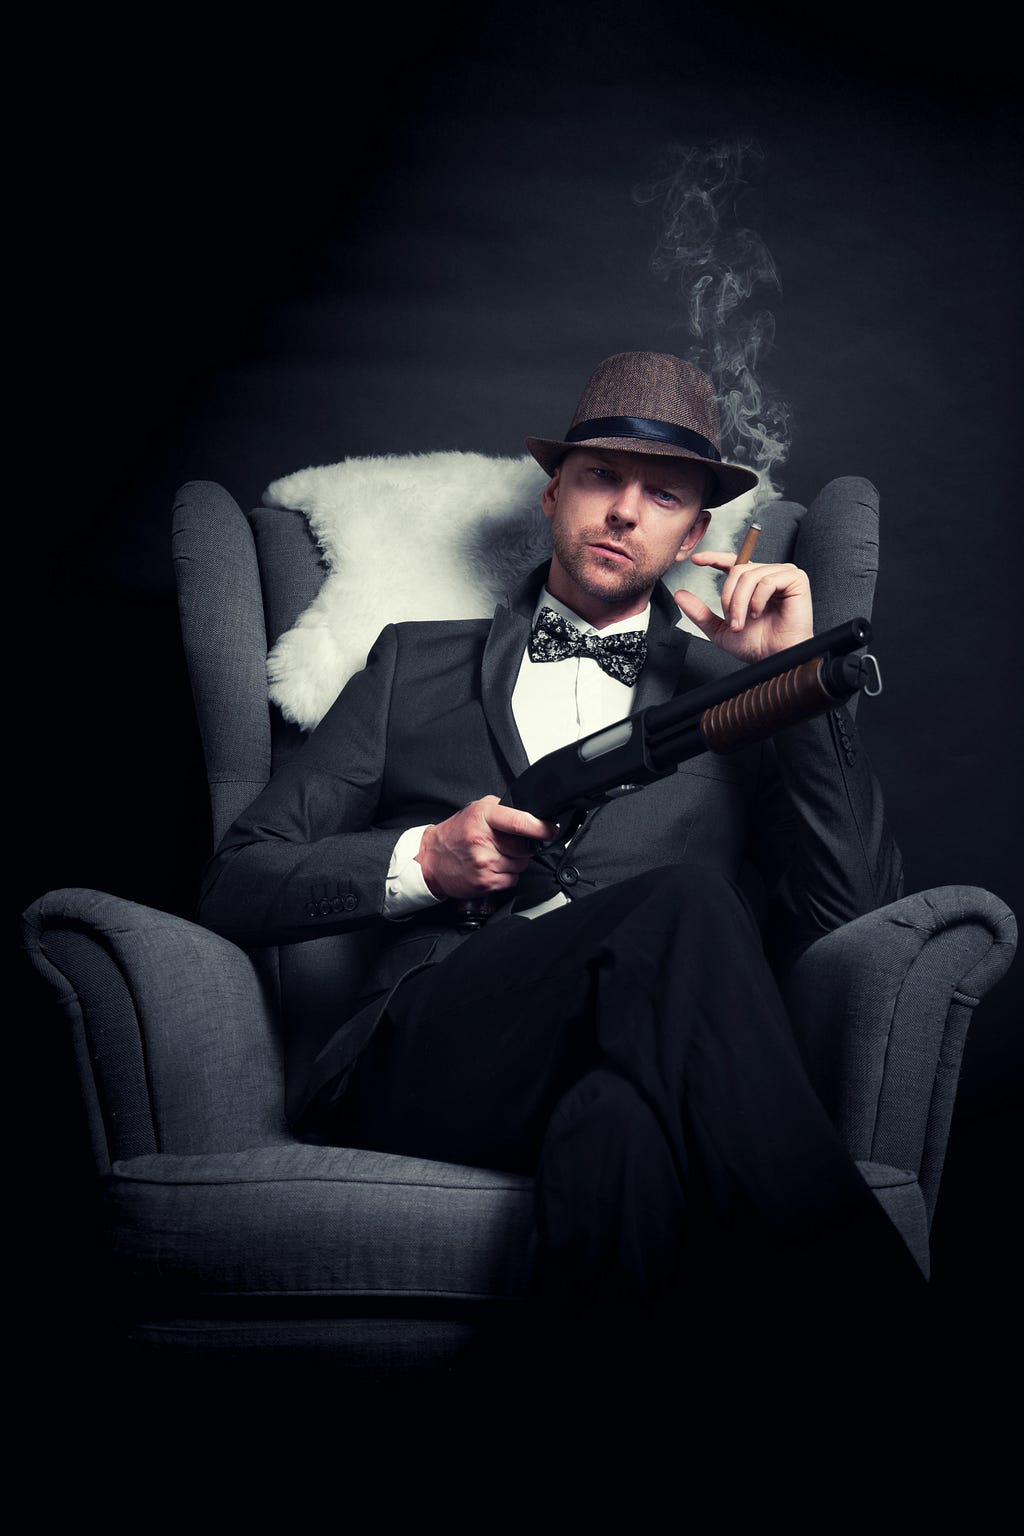 man with mobster appearance wearing old-time hat, bowtie and suit leaning in an armchair, holding a smoky cigarette in one hand and a type of shotgun in the other